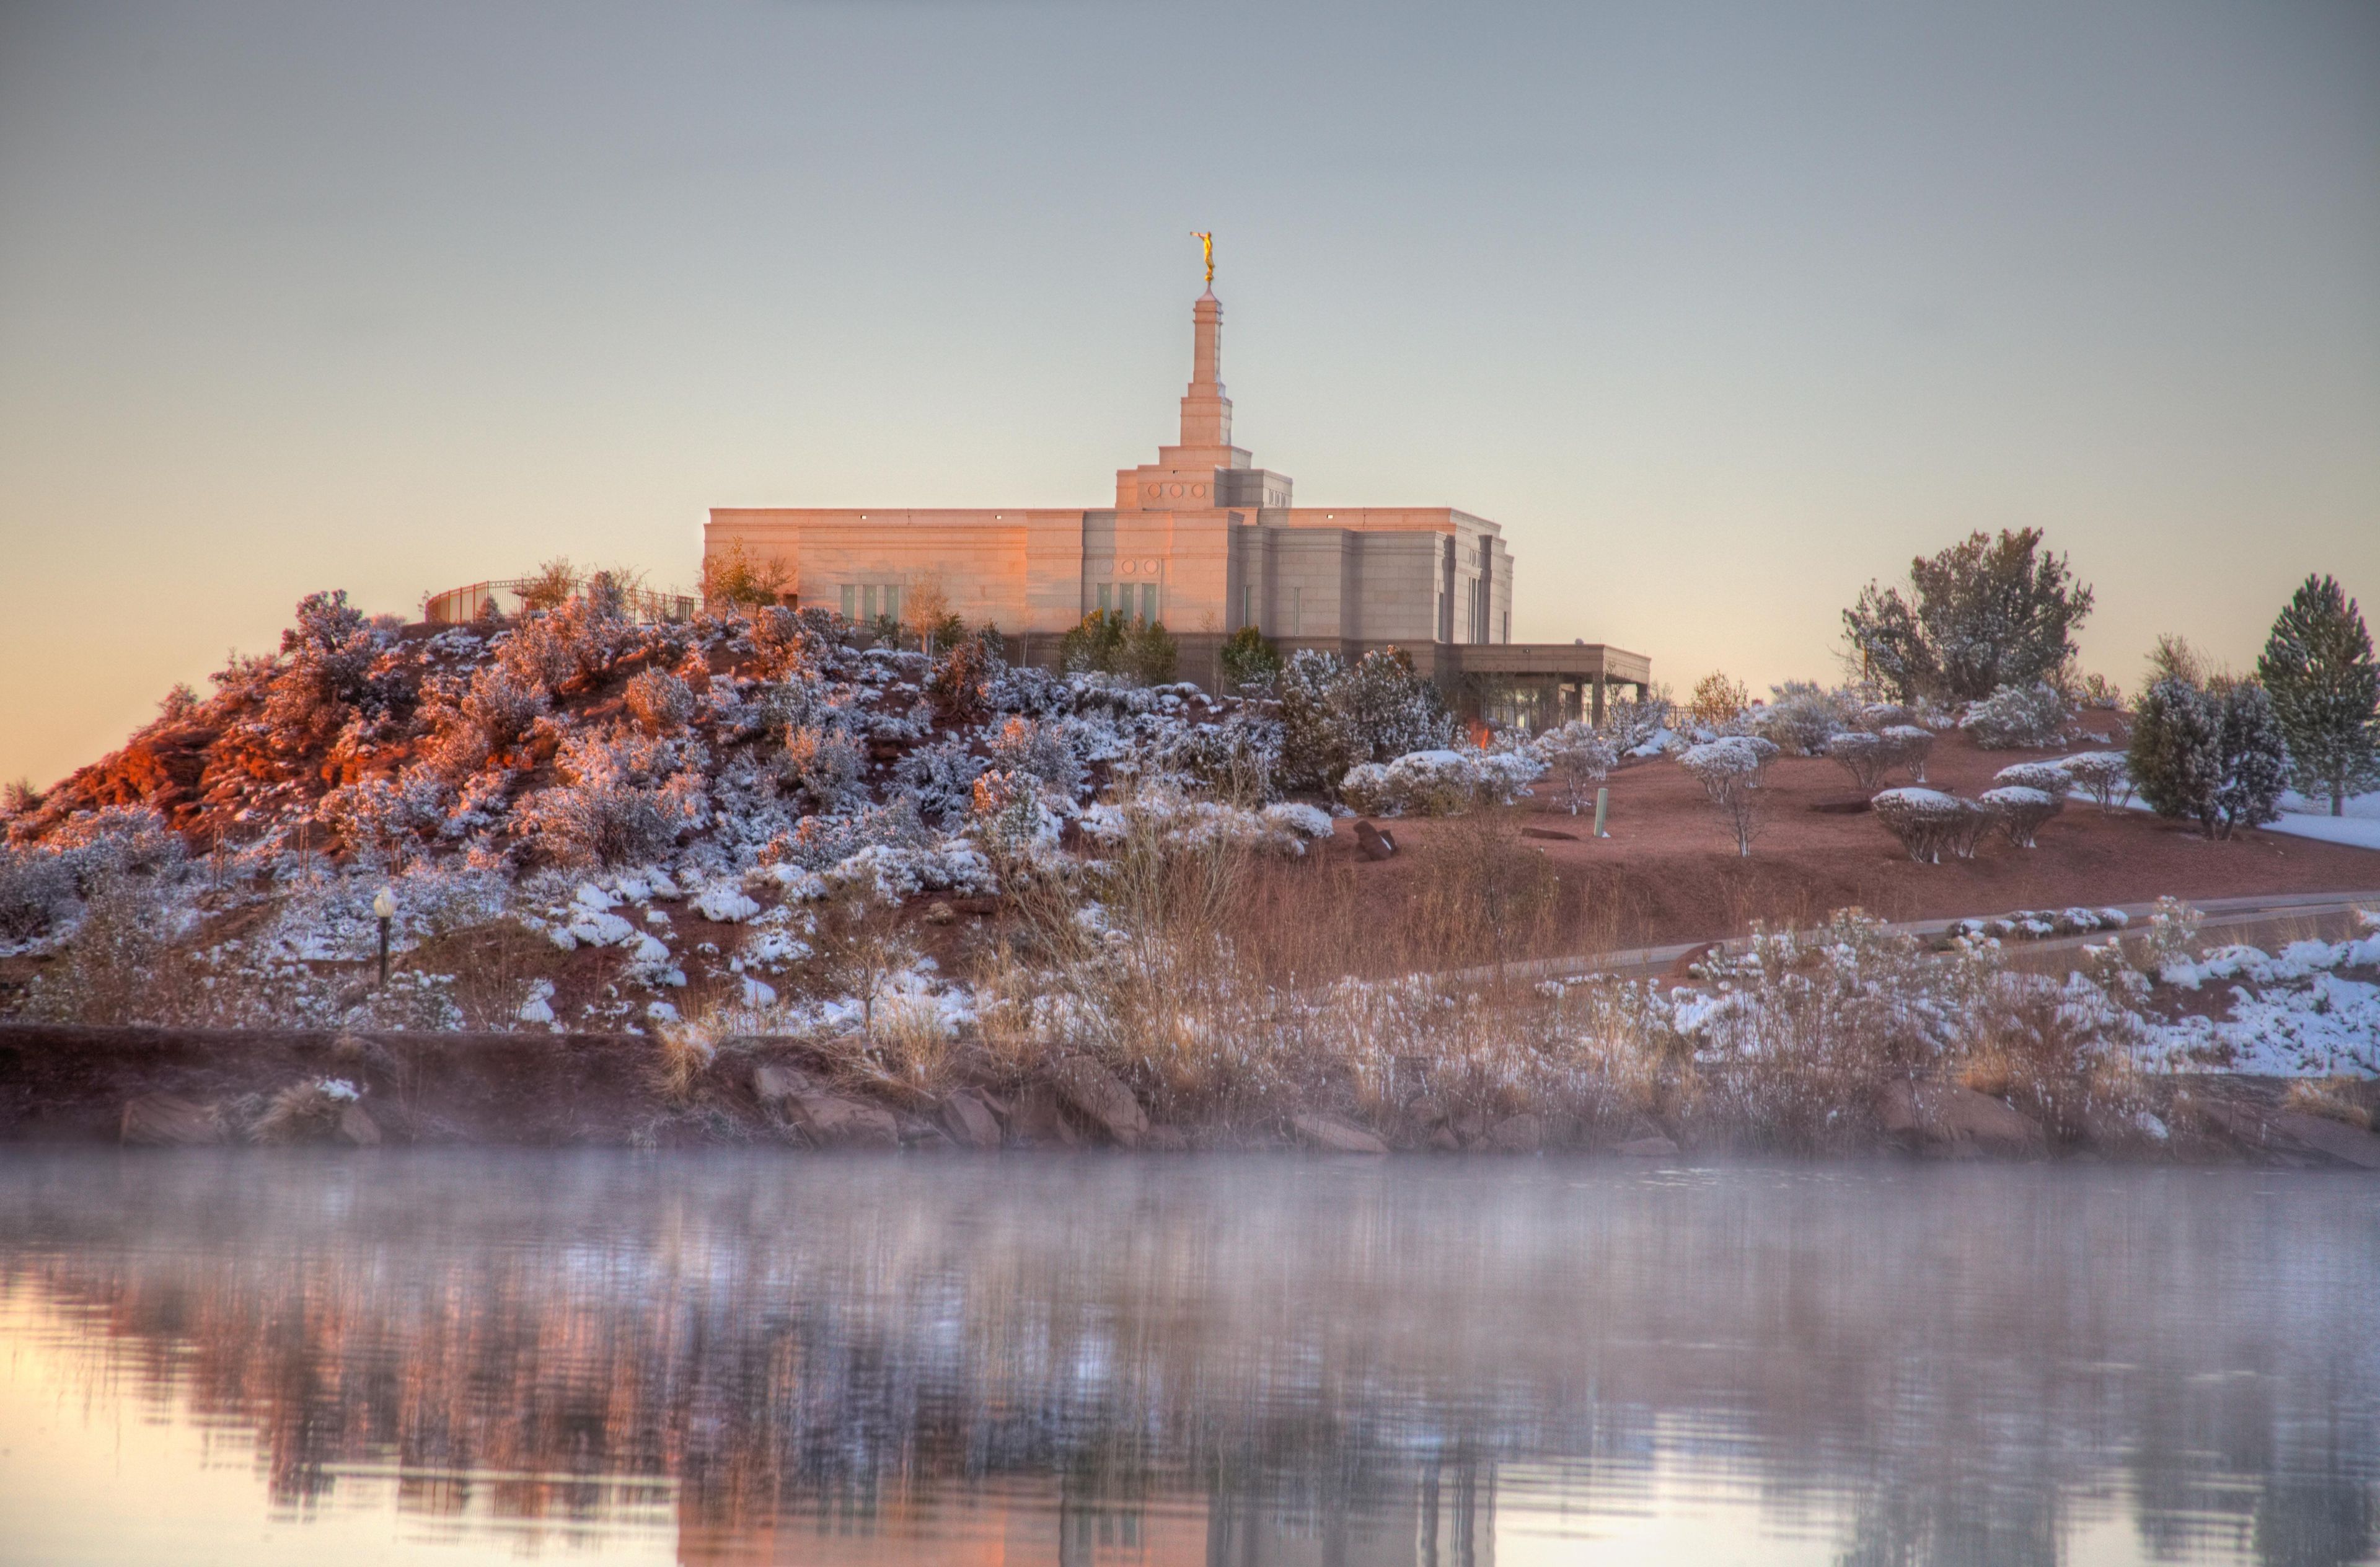 The Snowflake Arizona Temple, including the entrance and scenery.